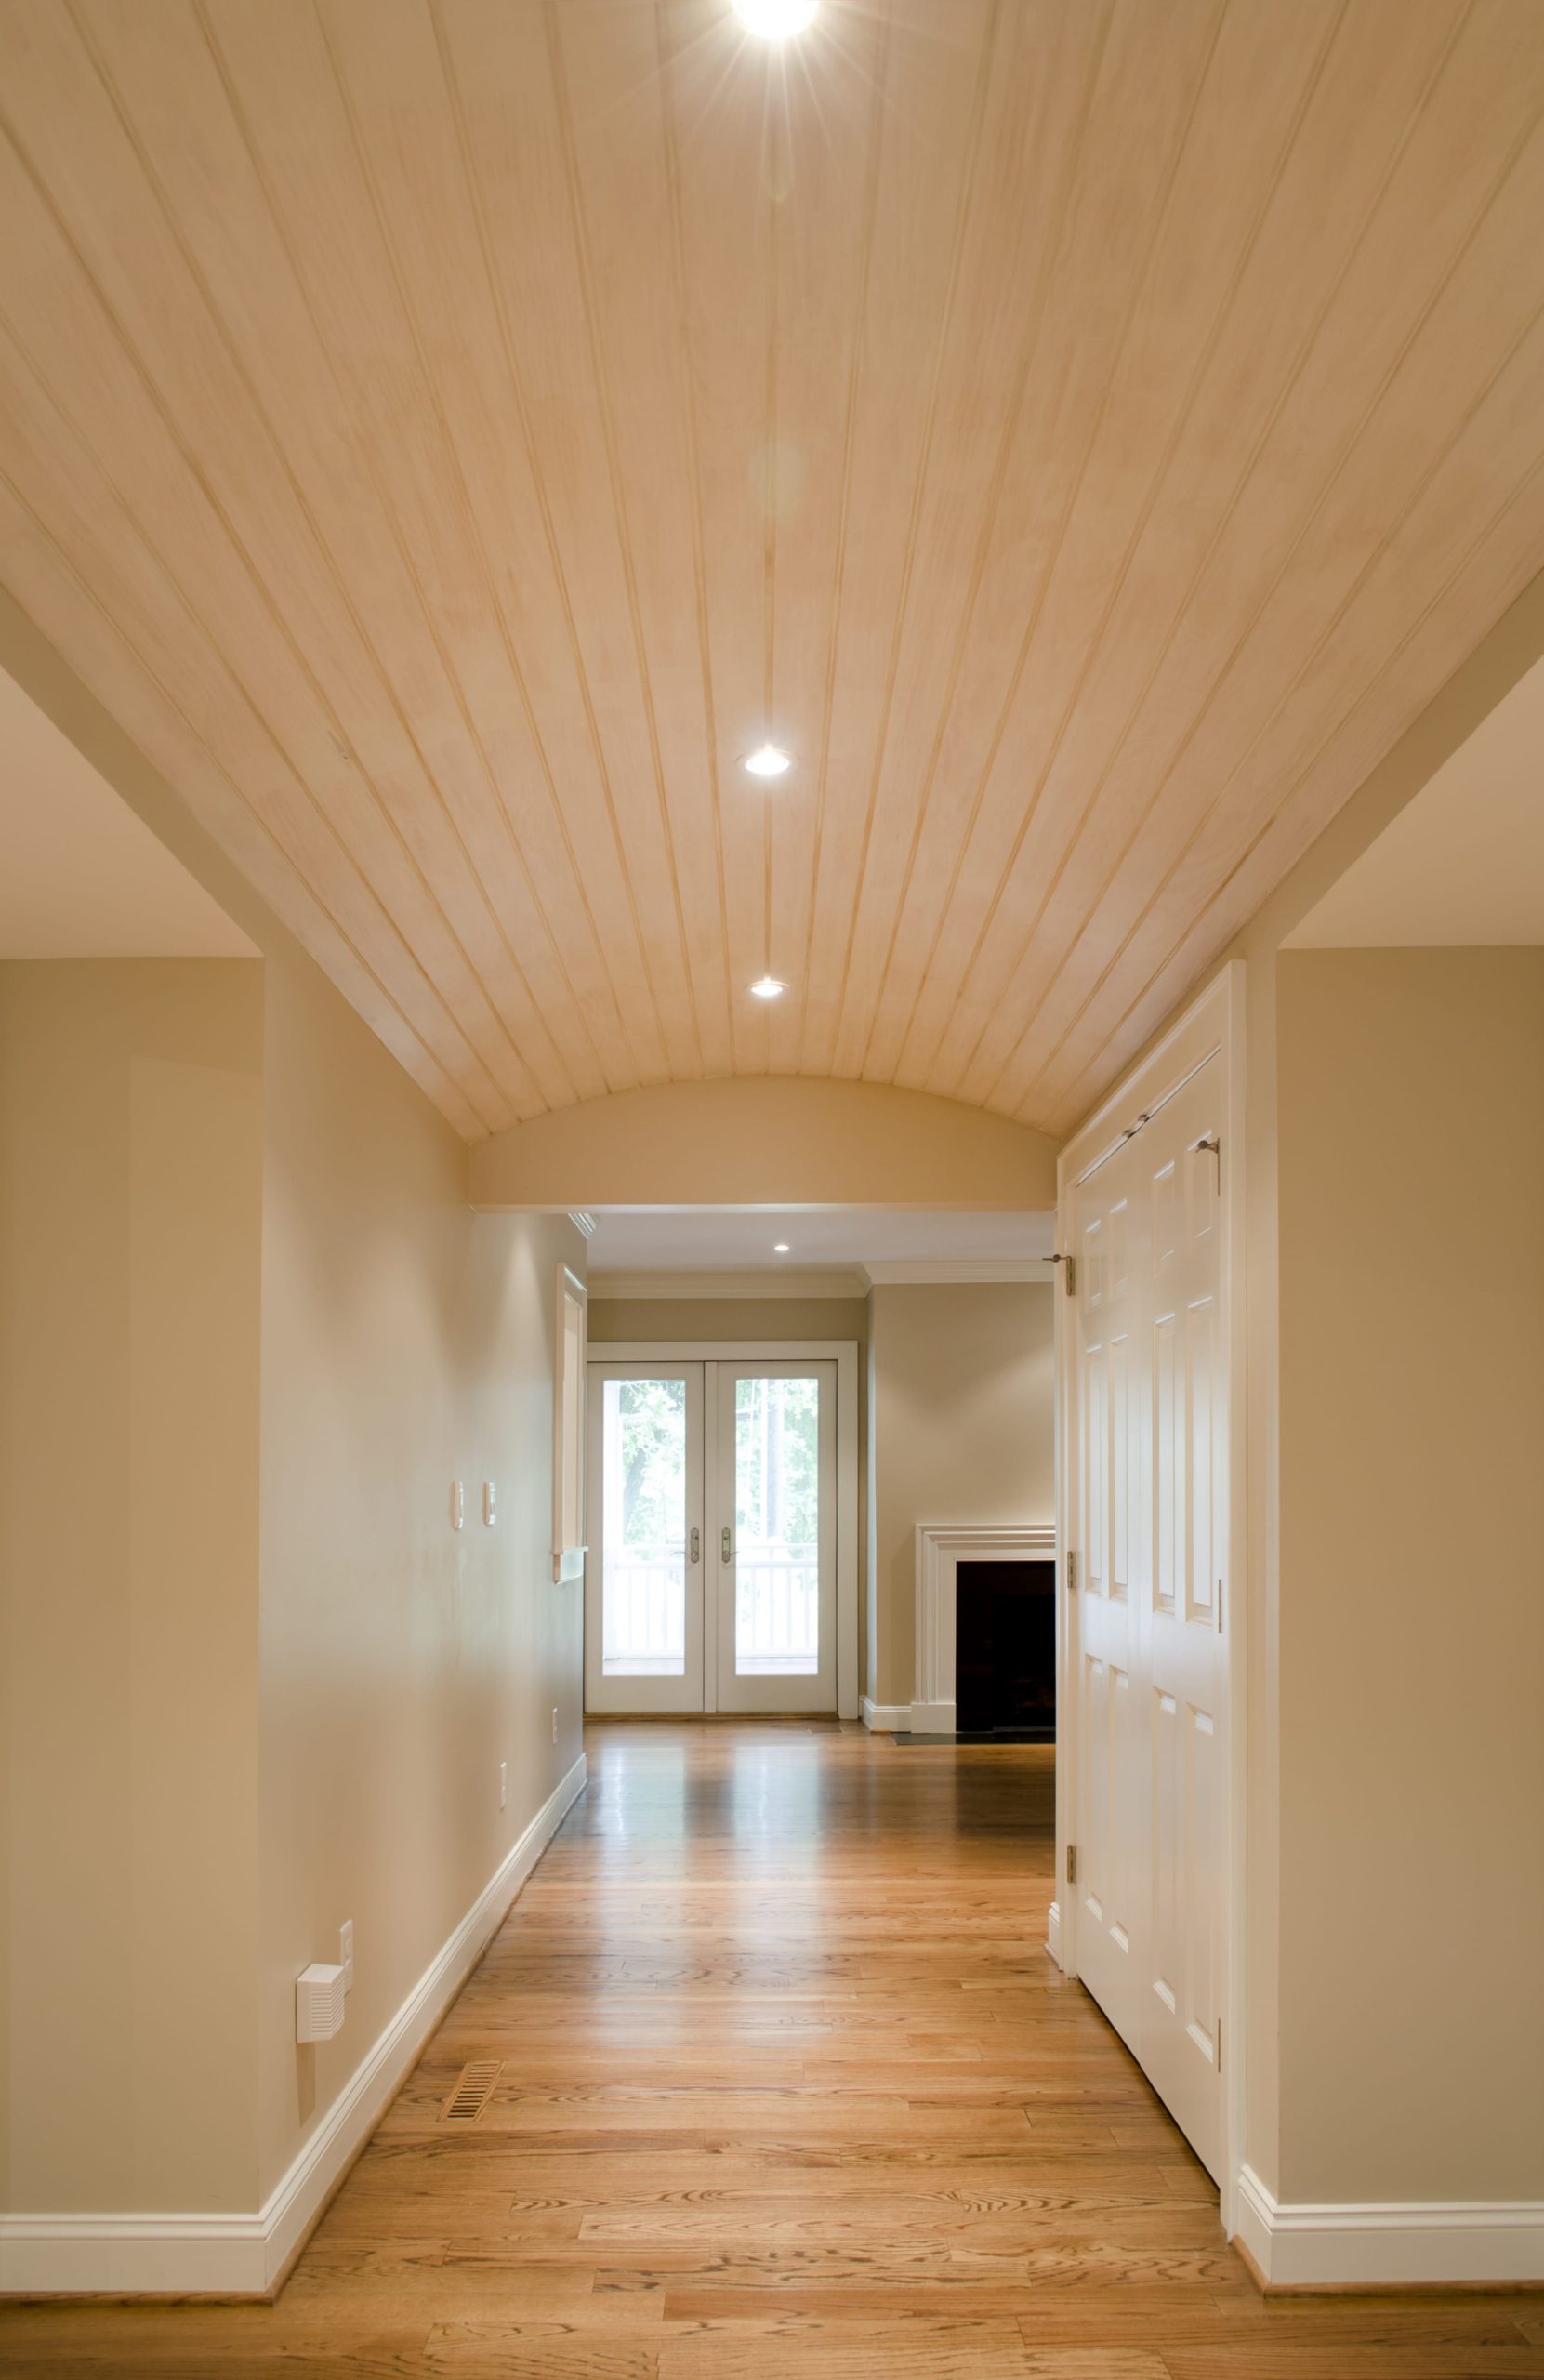 A hallway connecting to the living room has a unique barrel vault ceiling, adding character and charm to the space